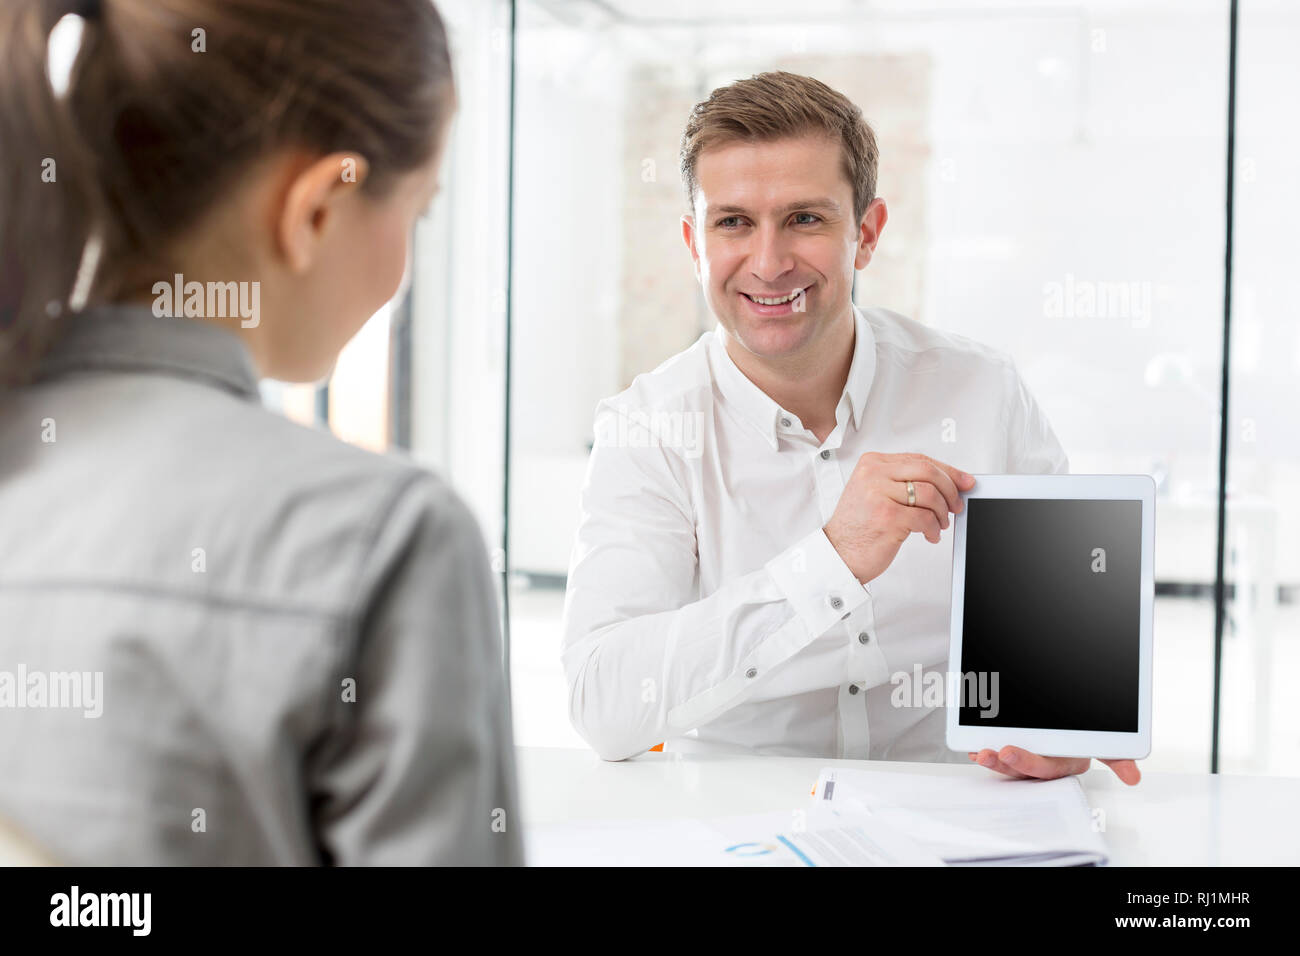 Creative businessman showing digital tablet to colleague in office Stock Photo